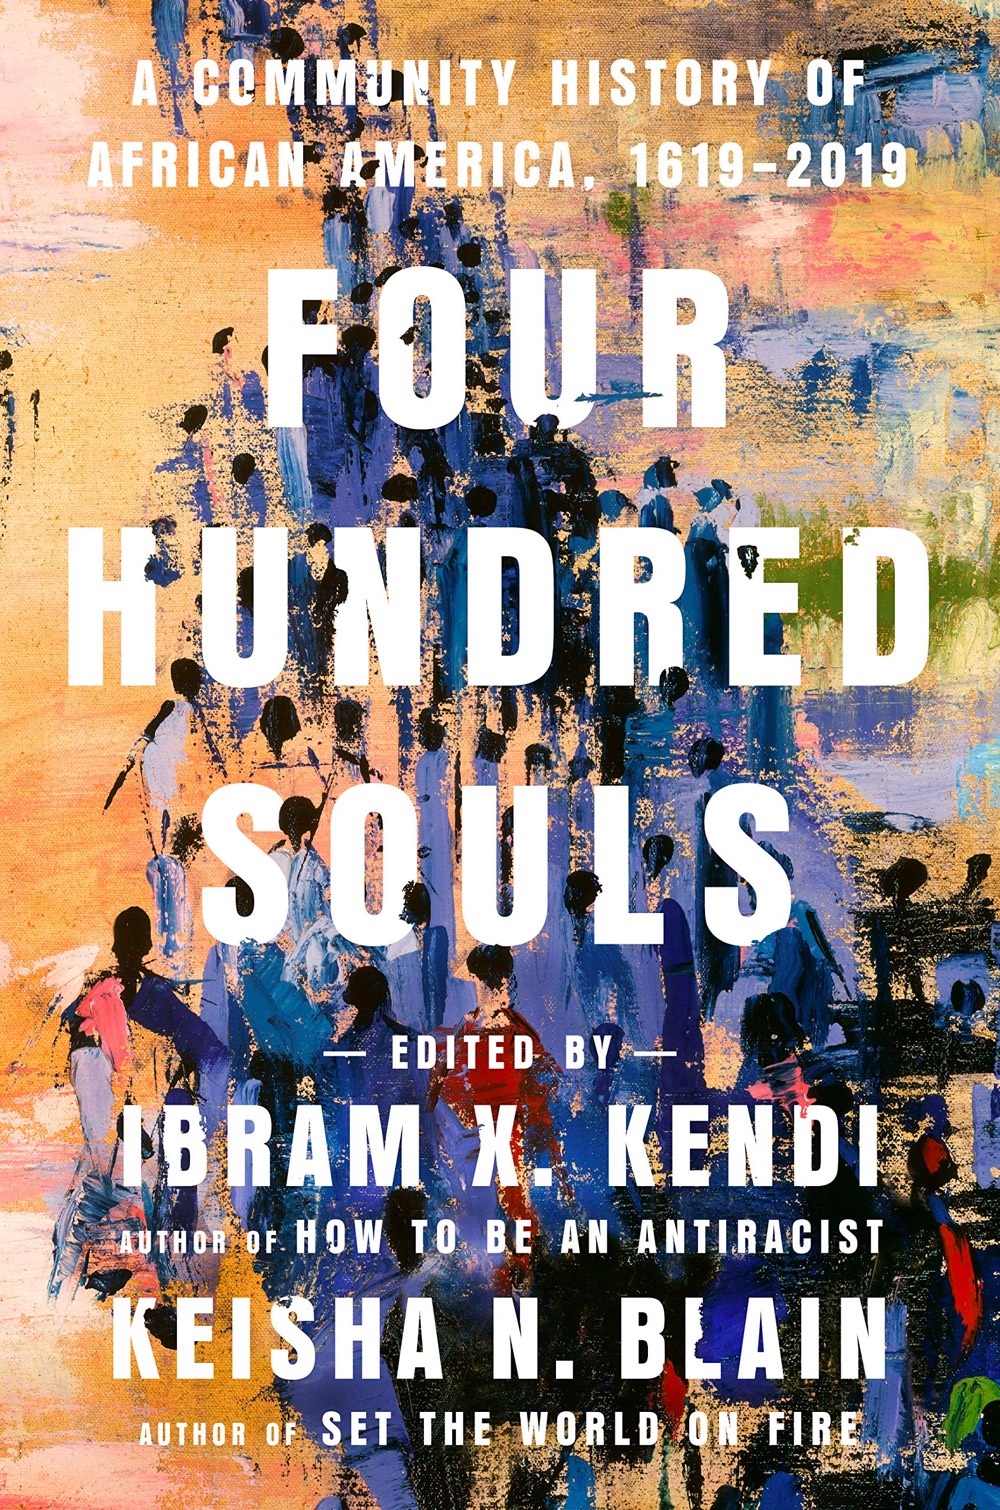 Book cover for Four Hundred Souls